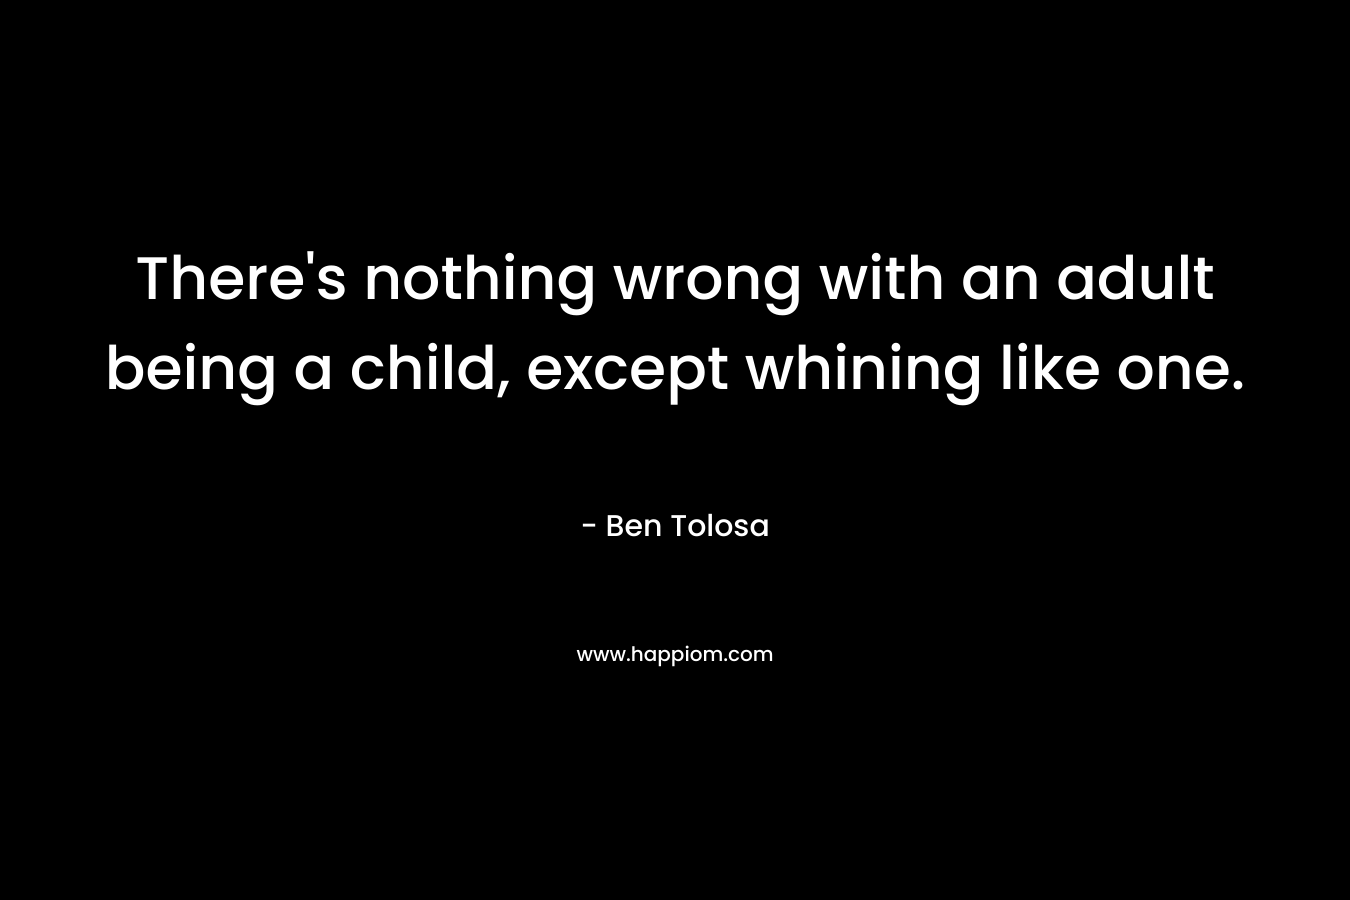 There’s nothing wrong with an adult being a child, except whining like one. – Ben Tolosa